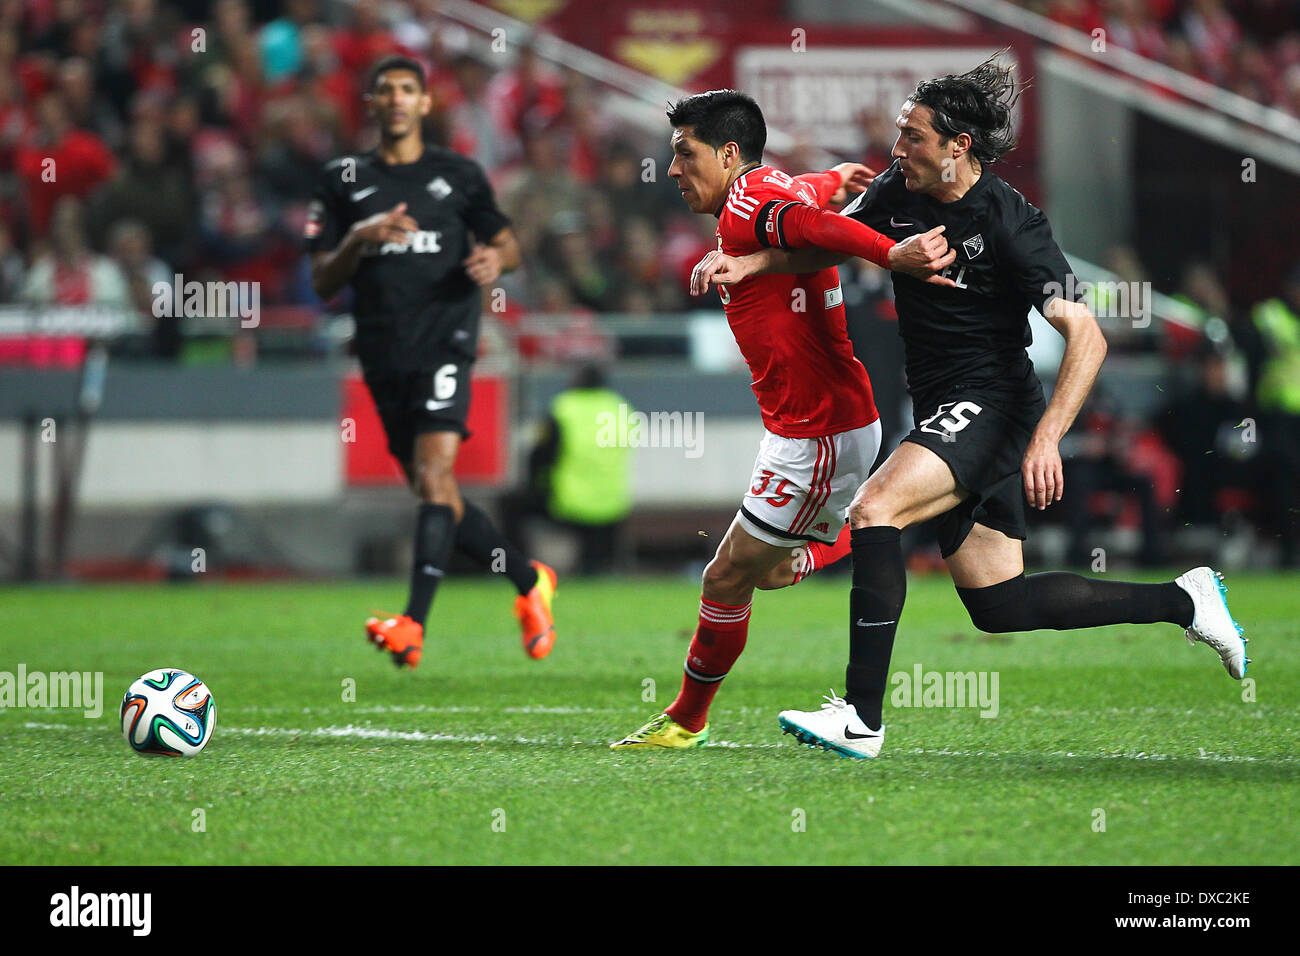 Lisbon, Portugal. 23rd Mar, 2014. Benfica's Argentine midfielder Enzo Perez (L) challenges Academica player Fernando Alexandre (R) before scoring the third goal for Benfica during a soccer match between SL Benfica and Academica in the Portuguese Premier League, at Benfica's Luz Stadium in Lisbon, on March 23, 2014. © Action Plus Sports/Alamy Live News Stock Photo